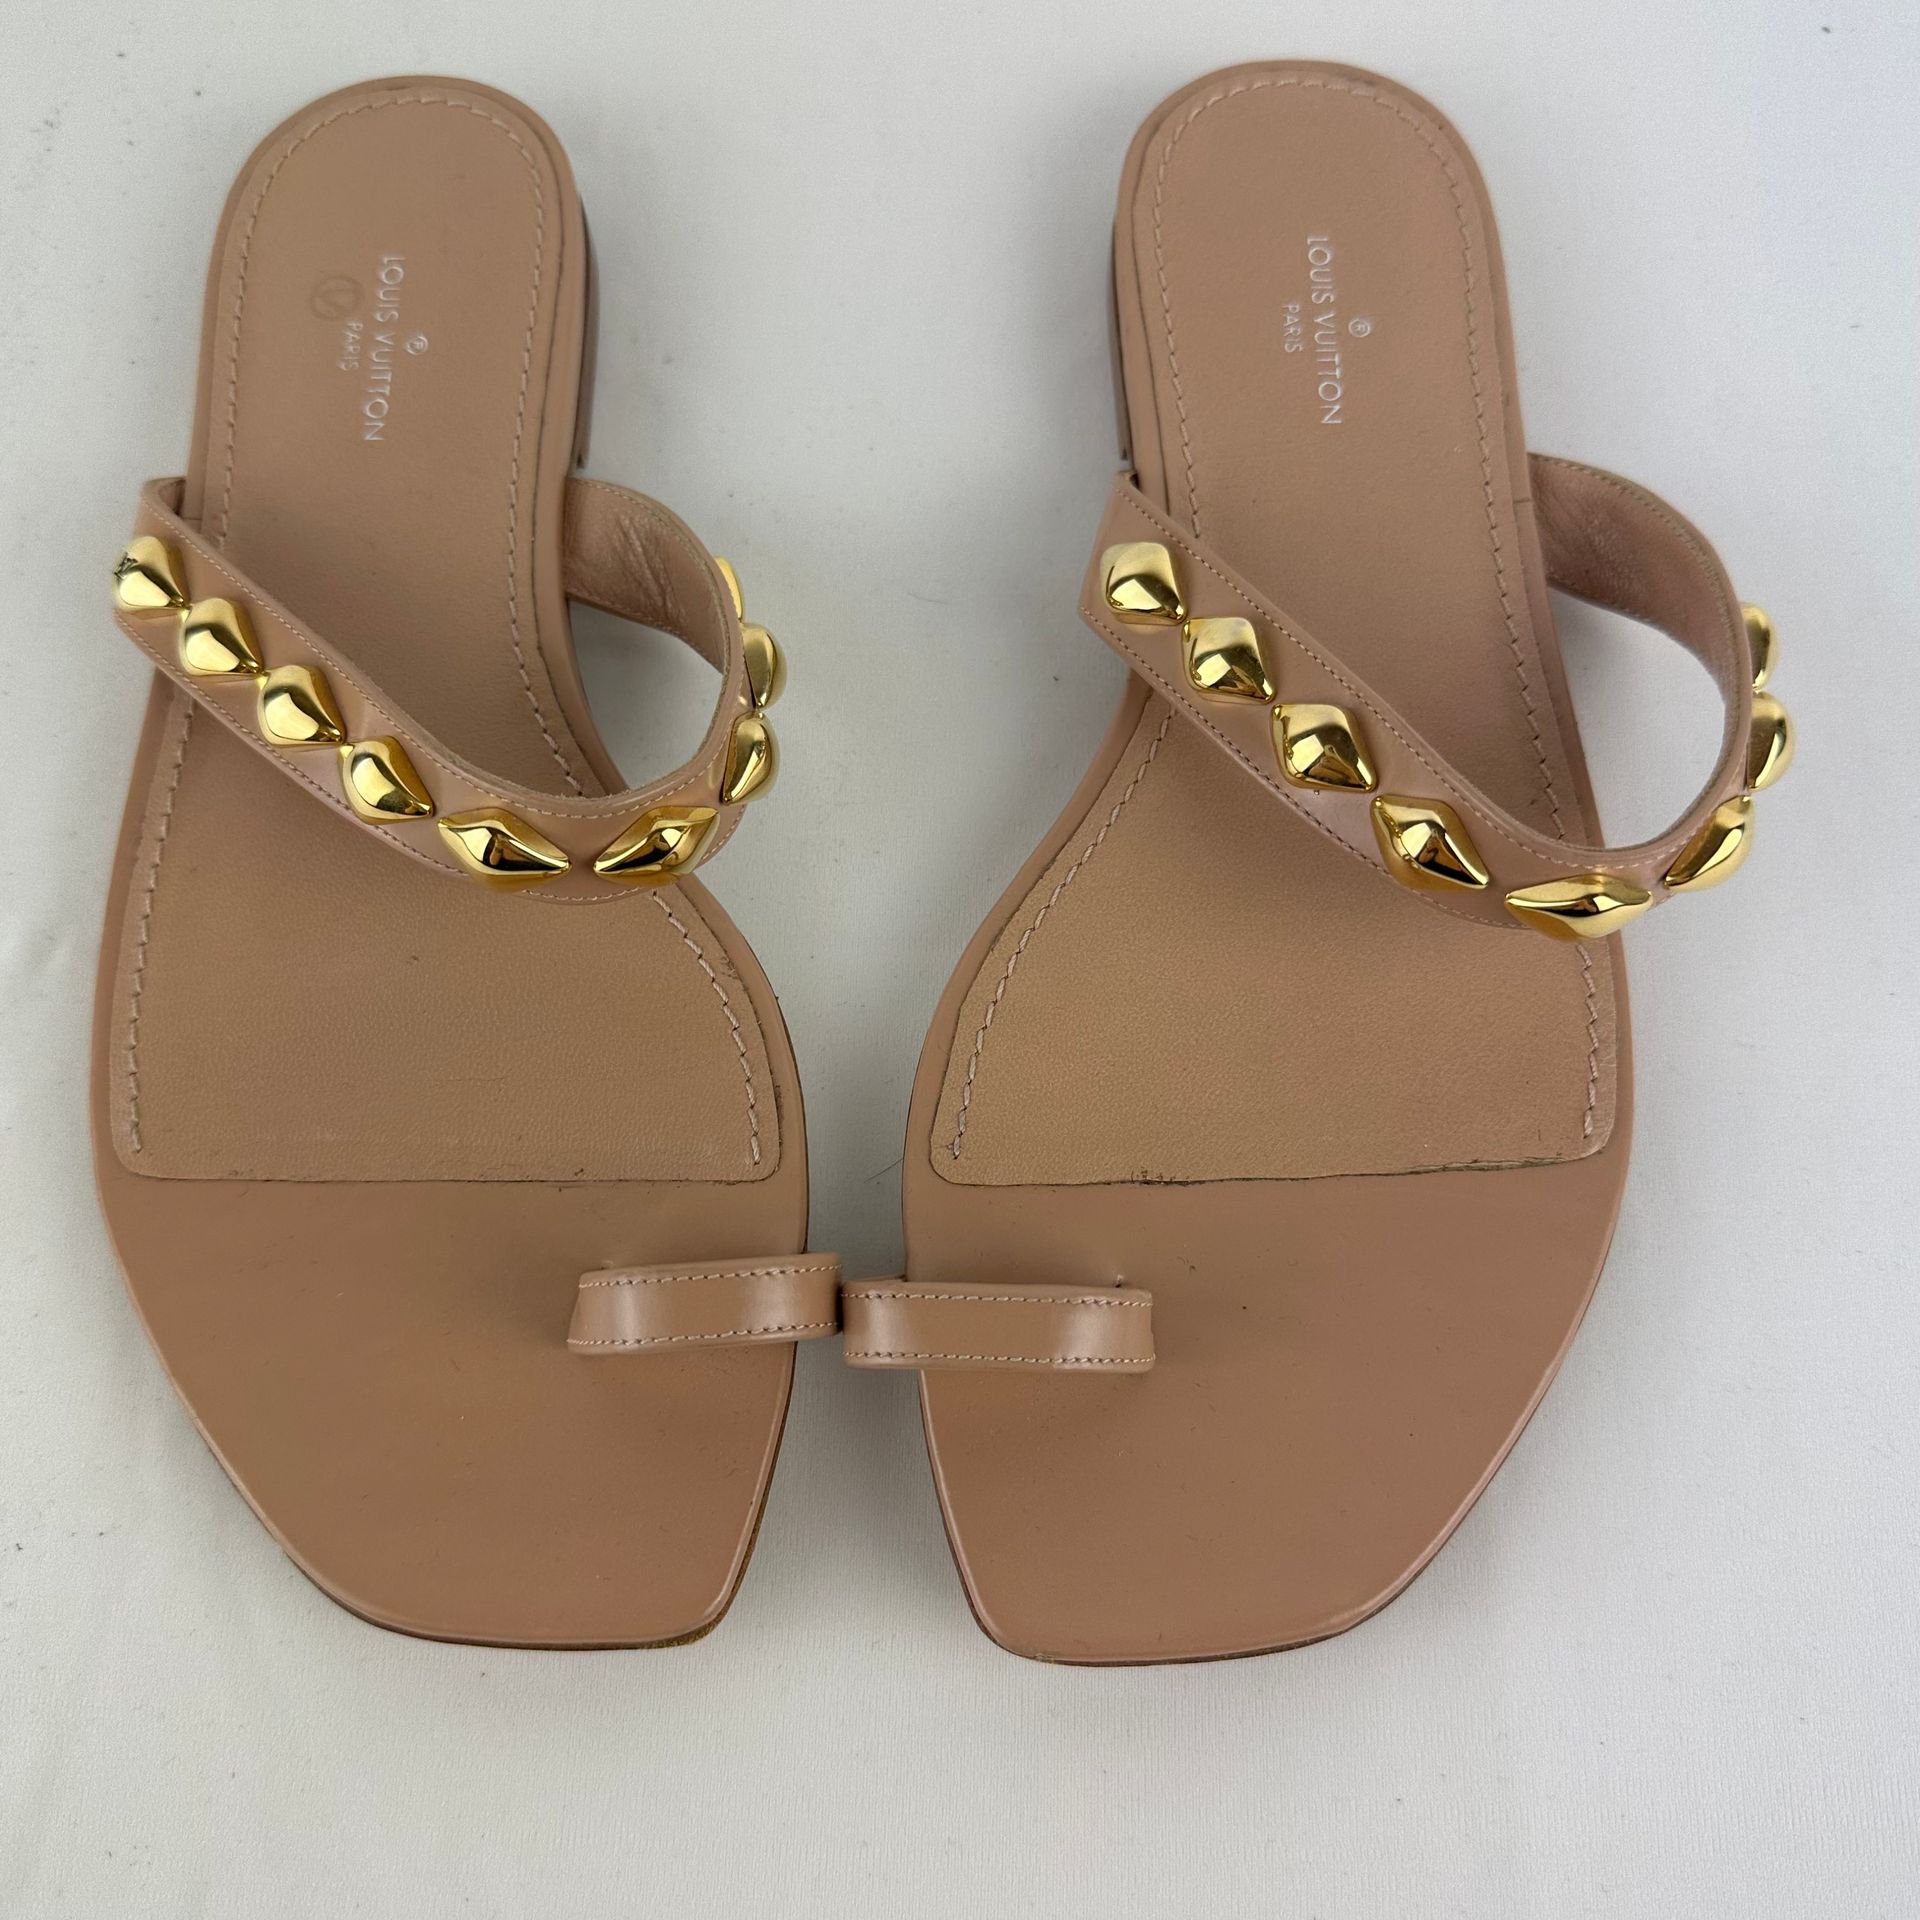 A pair of beige LOUIS VUITTON summer sandals with gold m…